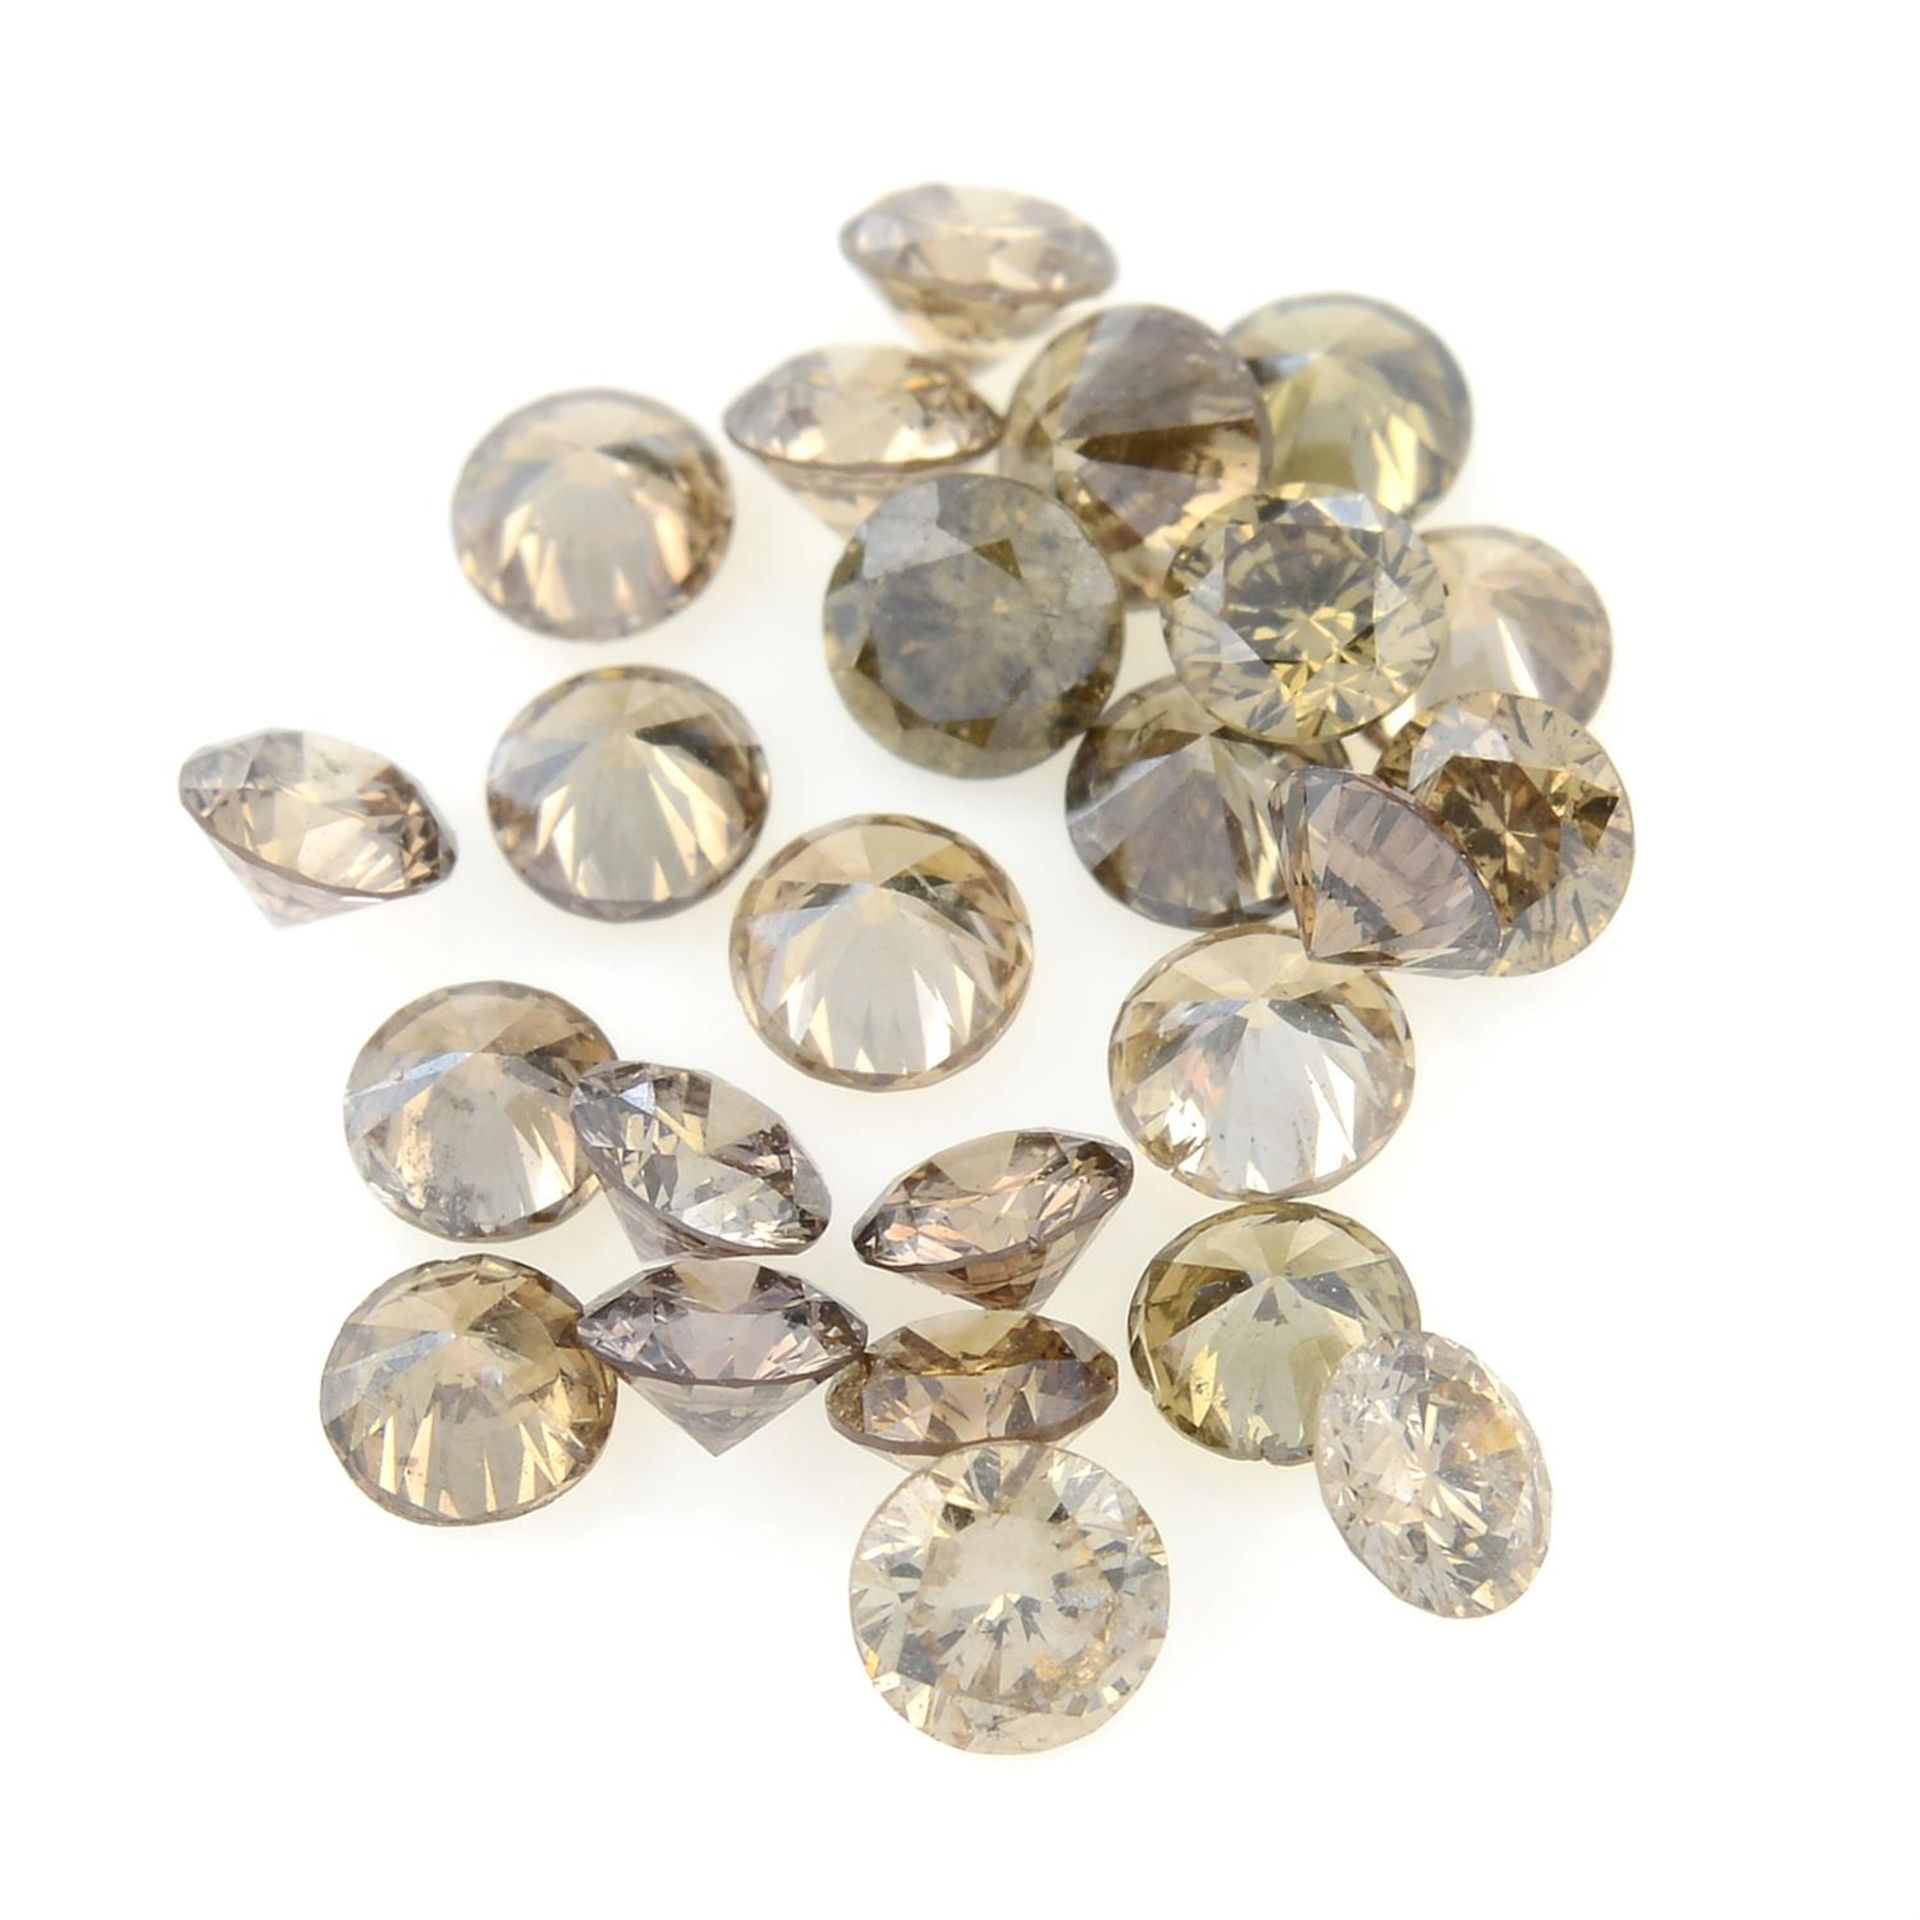 Selection of brilliant cut 'brown' diamonds, weighing 1.70ct